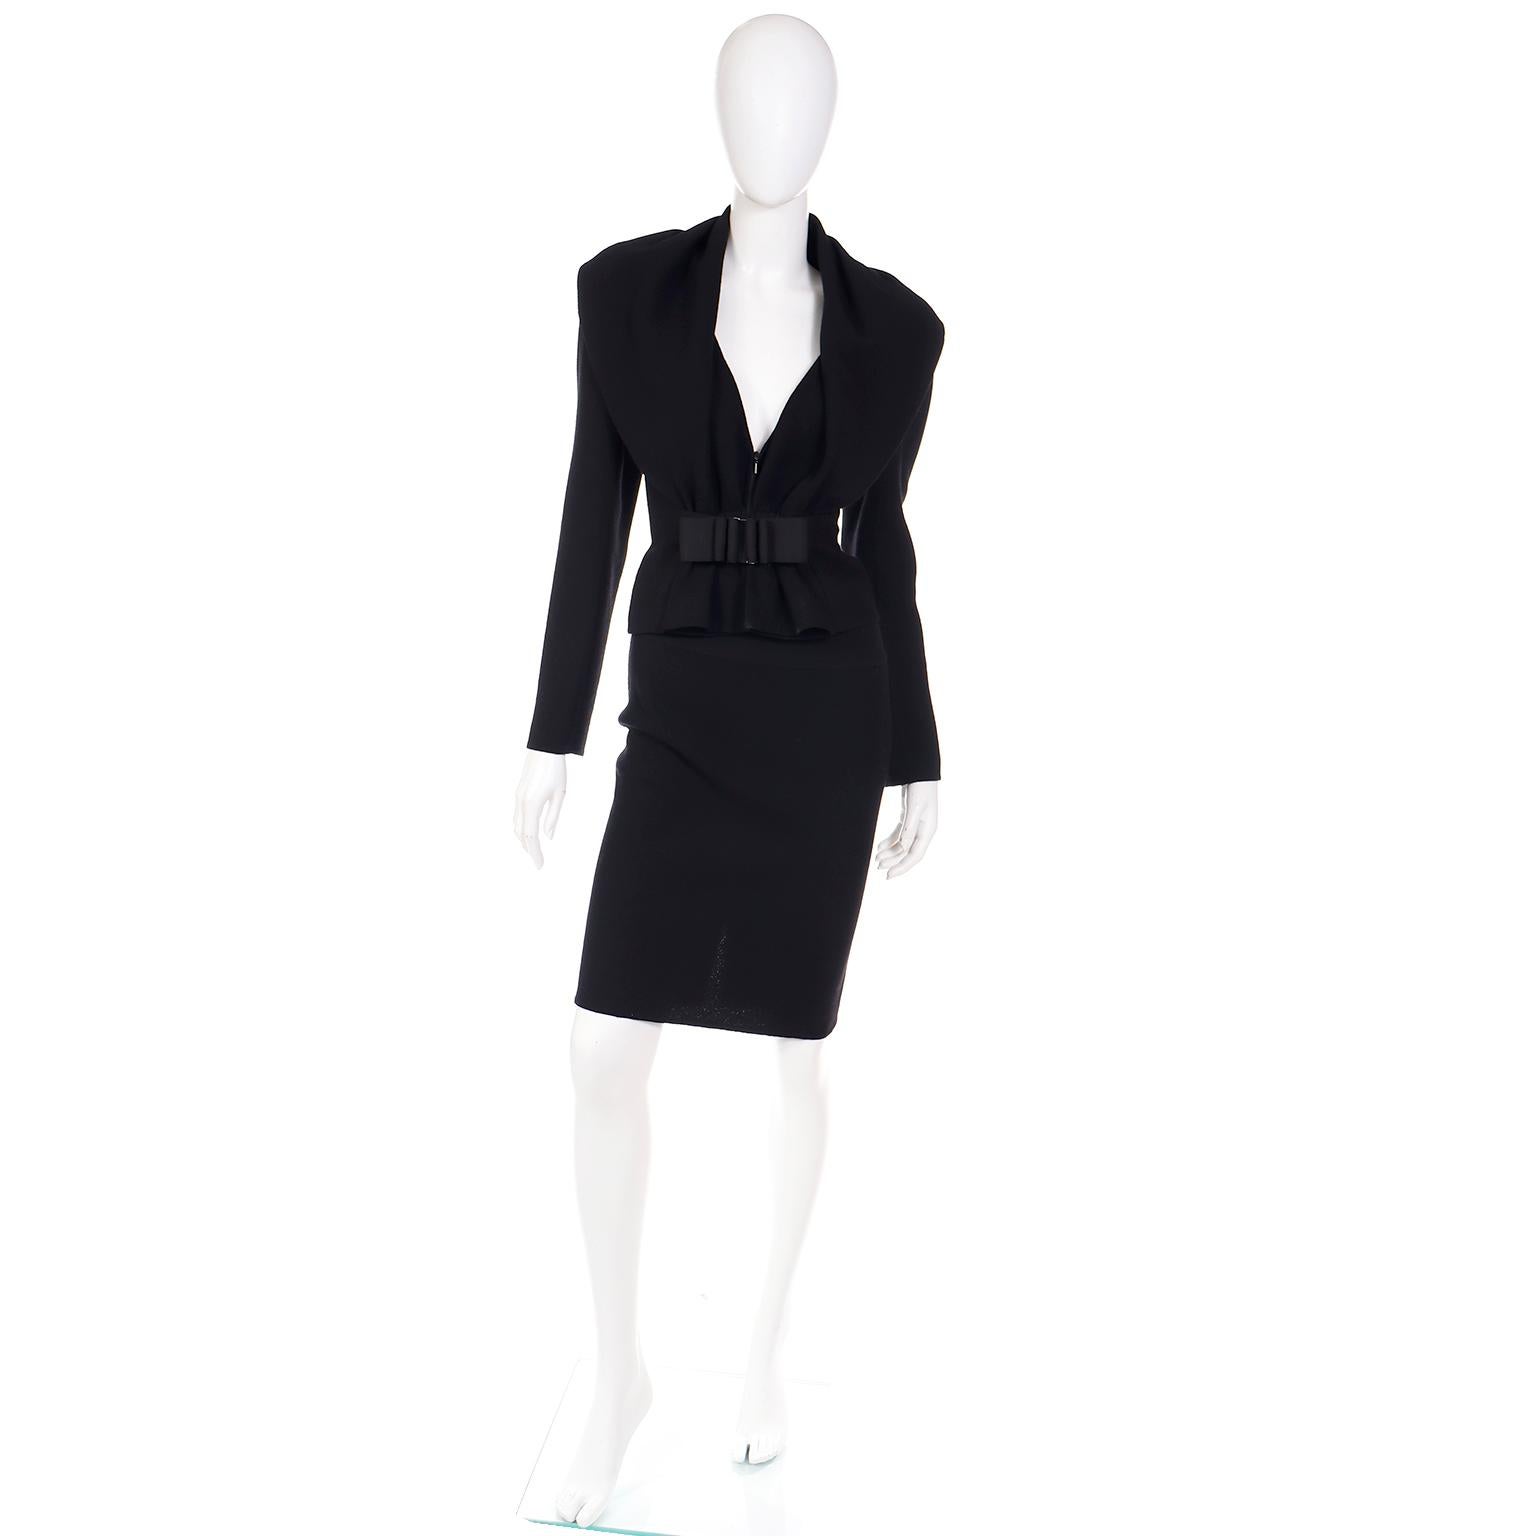 This is a vintage Valentino black wool crepe jacket and skirt suit with incredible style and attention to detail. We love Valentino Garavani pieces and once you've owned a Valentino piece, you will understand why!

The low V jacket has a shawl